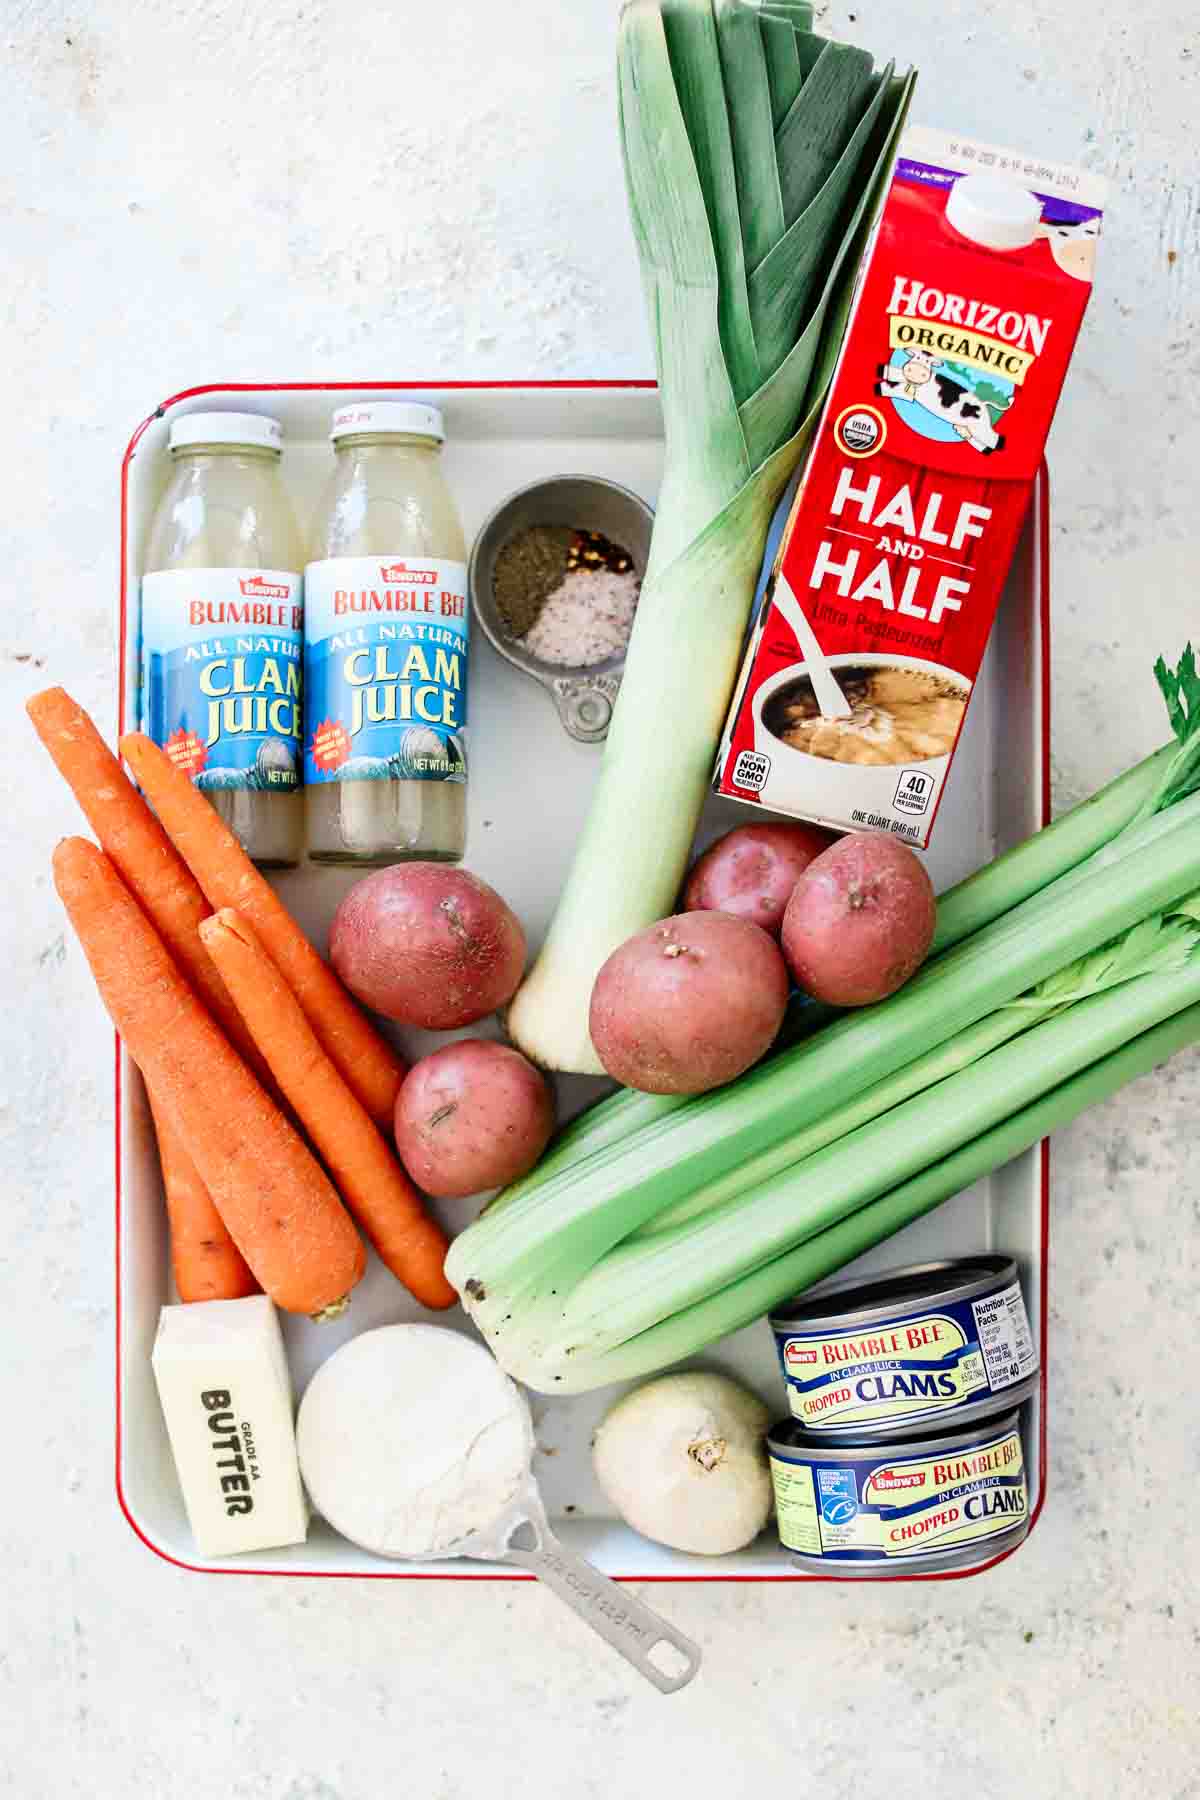 The ingredients needed for clam chowder on a baking sheet including clam juice, potatoes, carrots, celery, flour, butter, clams, cream, and leeks.